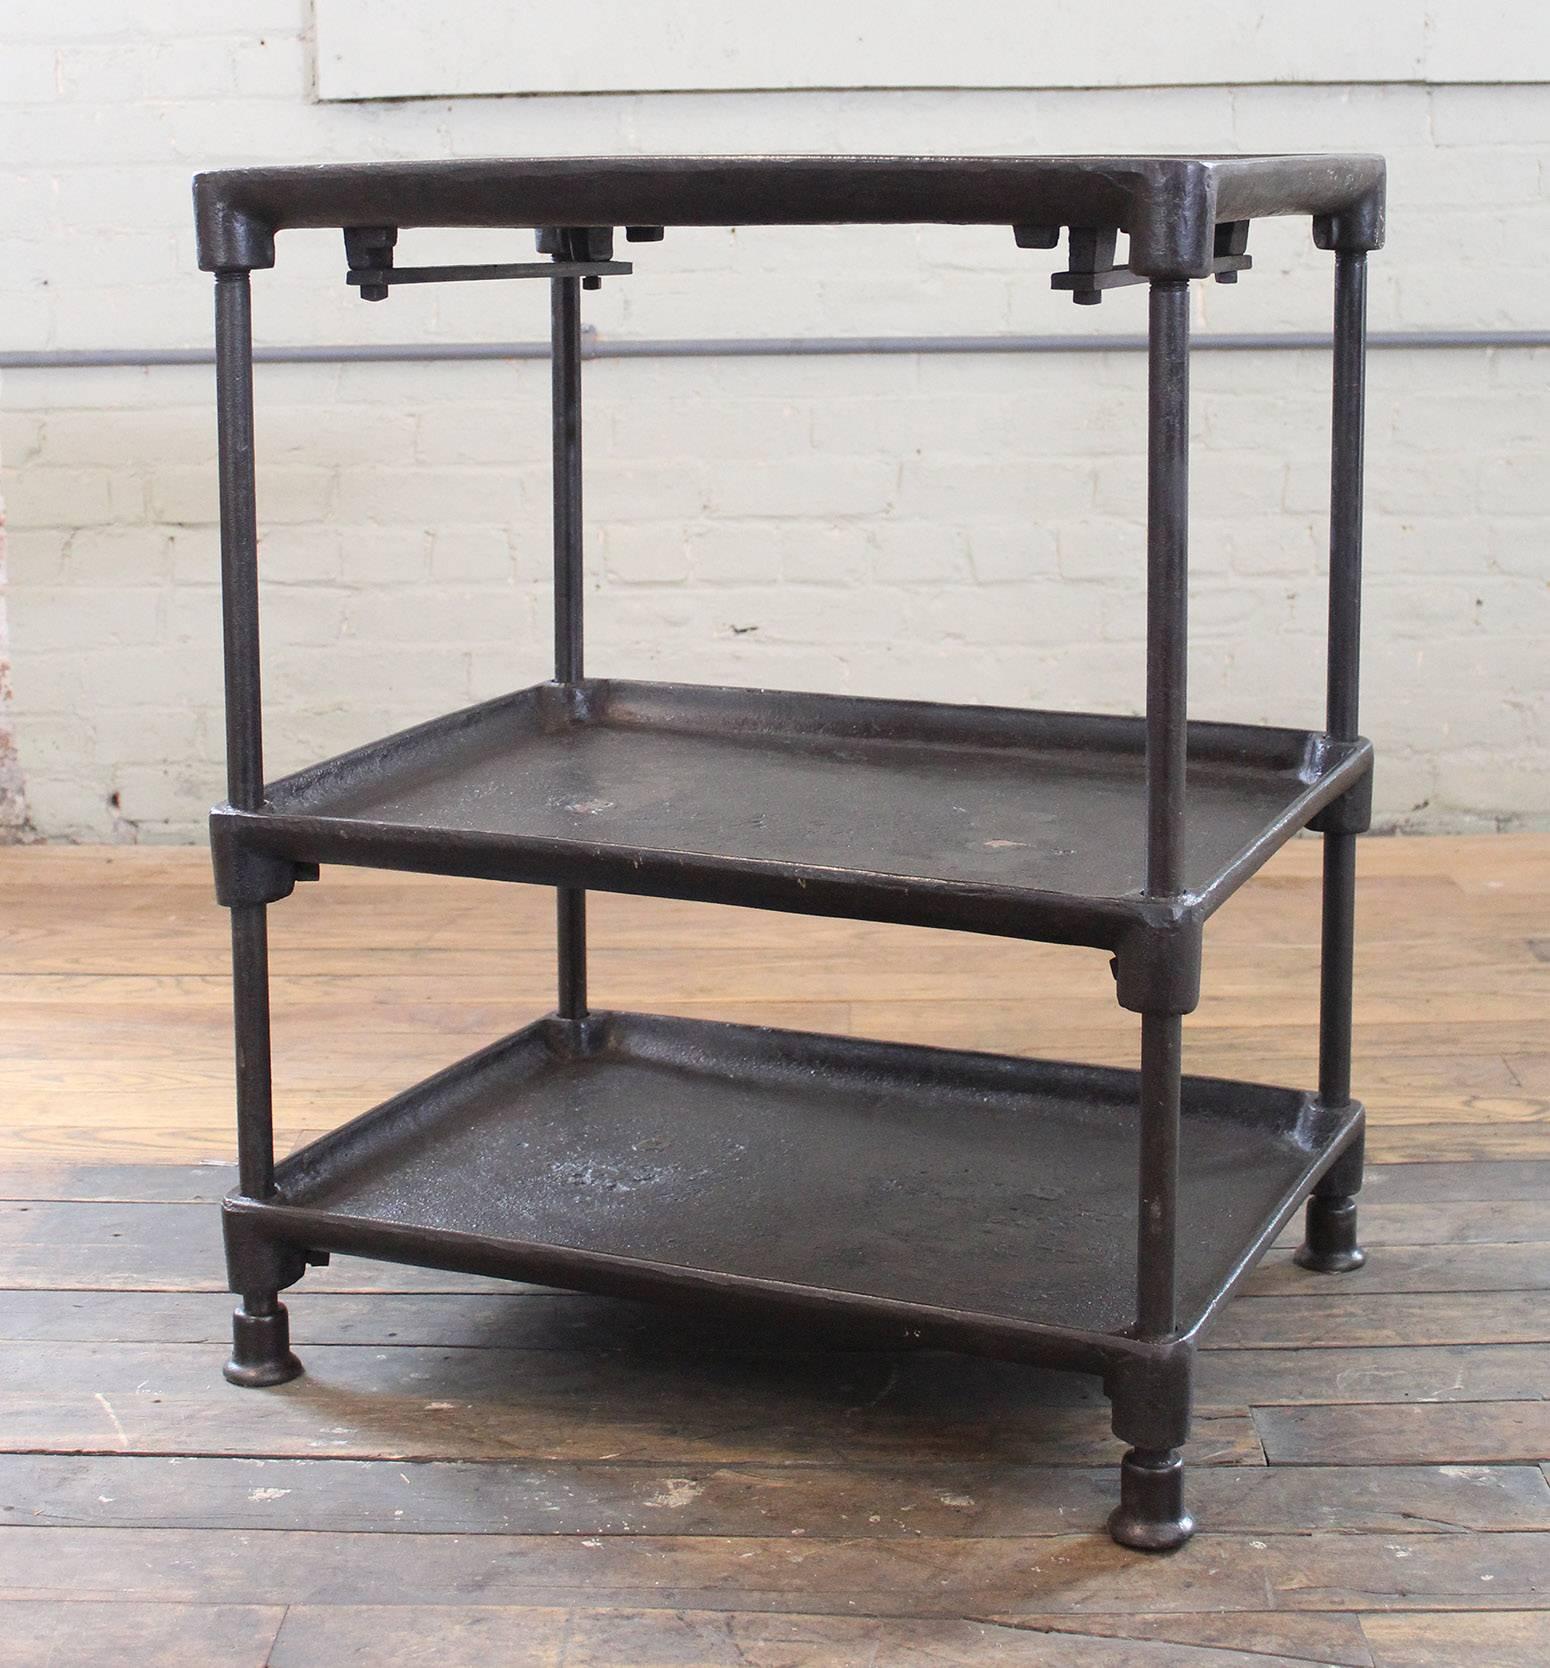 Three-tier cast iron vintage Industrial side table, bar cart with adjustable shelves and cast iron feet. Bottom two shelves adjust via a square set screw. Dimensions are 25 1/2